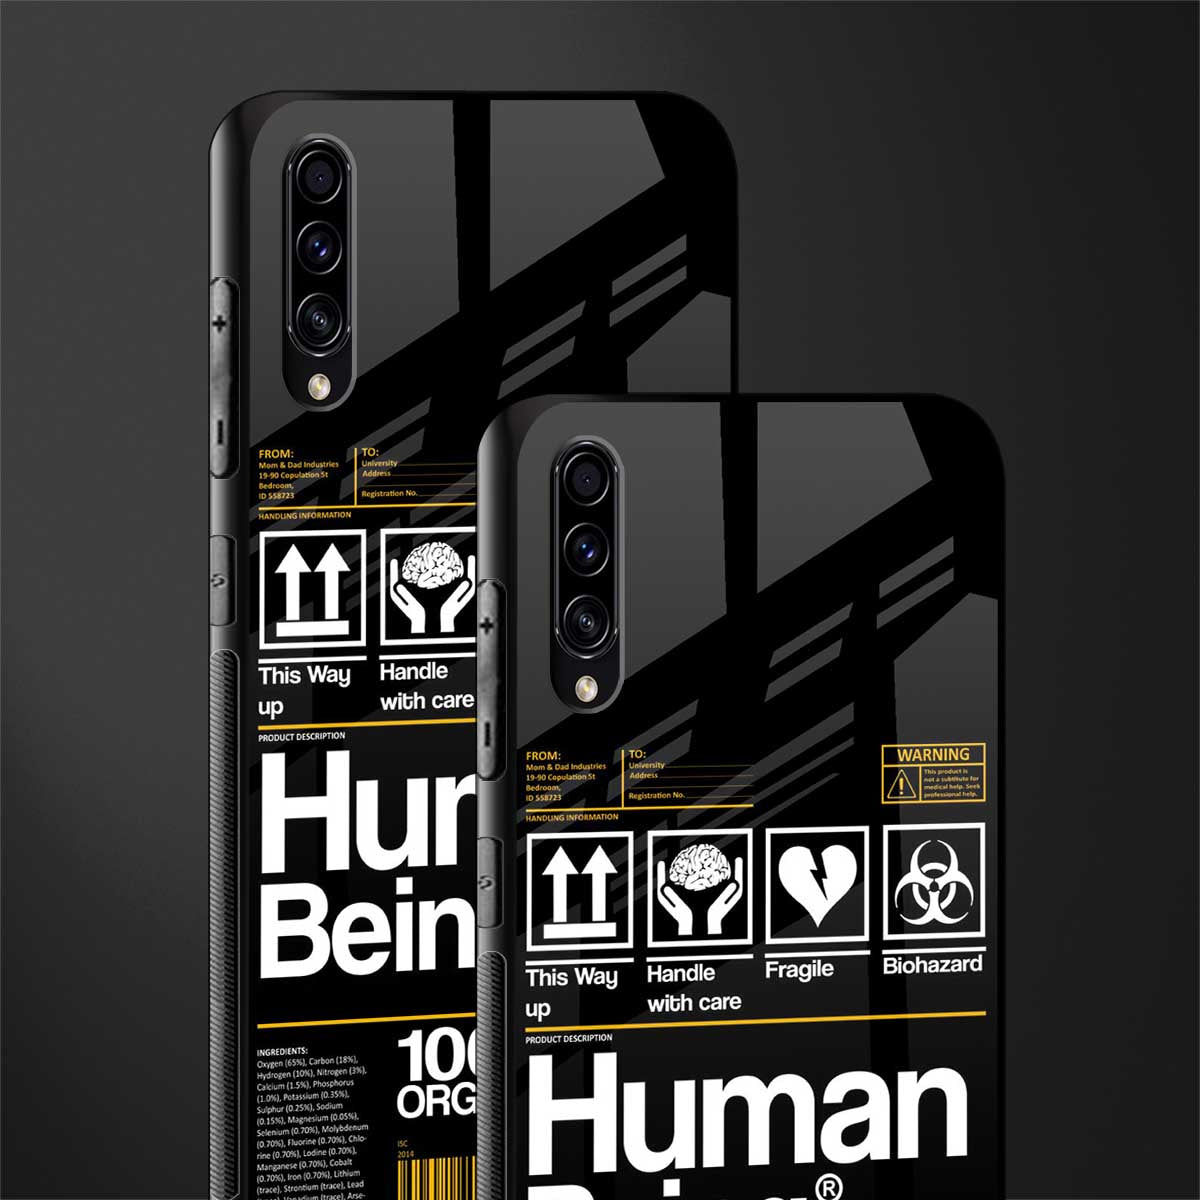 human being label phone cover for samsung galaxy a70s